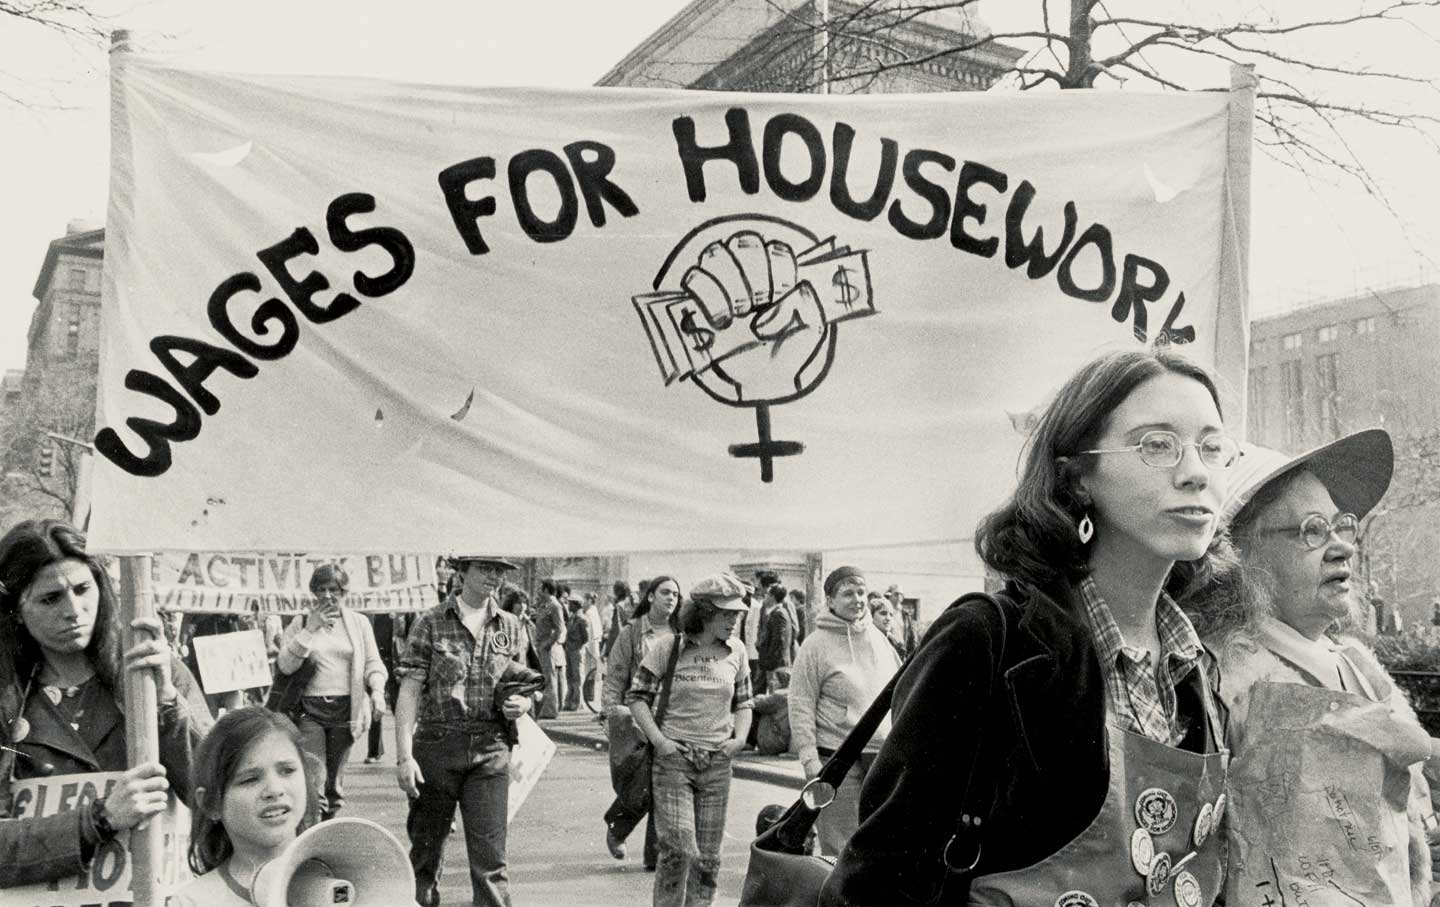 Wages for Housework Committee, International Women's Day, NYC, 1977. Photo: Bettye Lane, Schlesinger Library, Radcliffe Institute